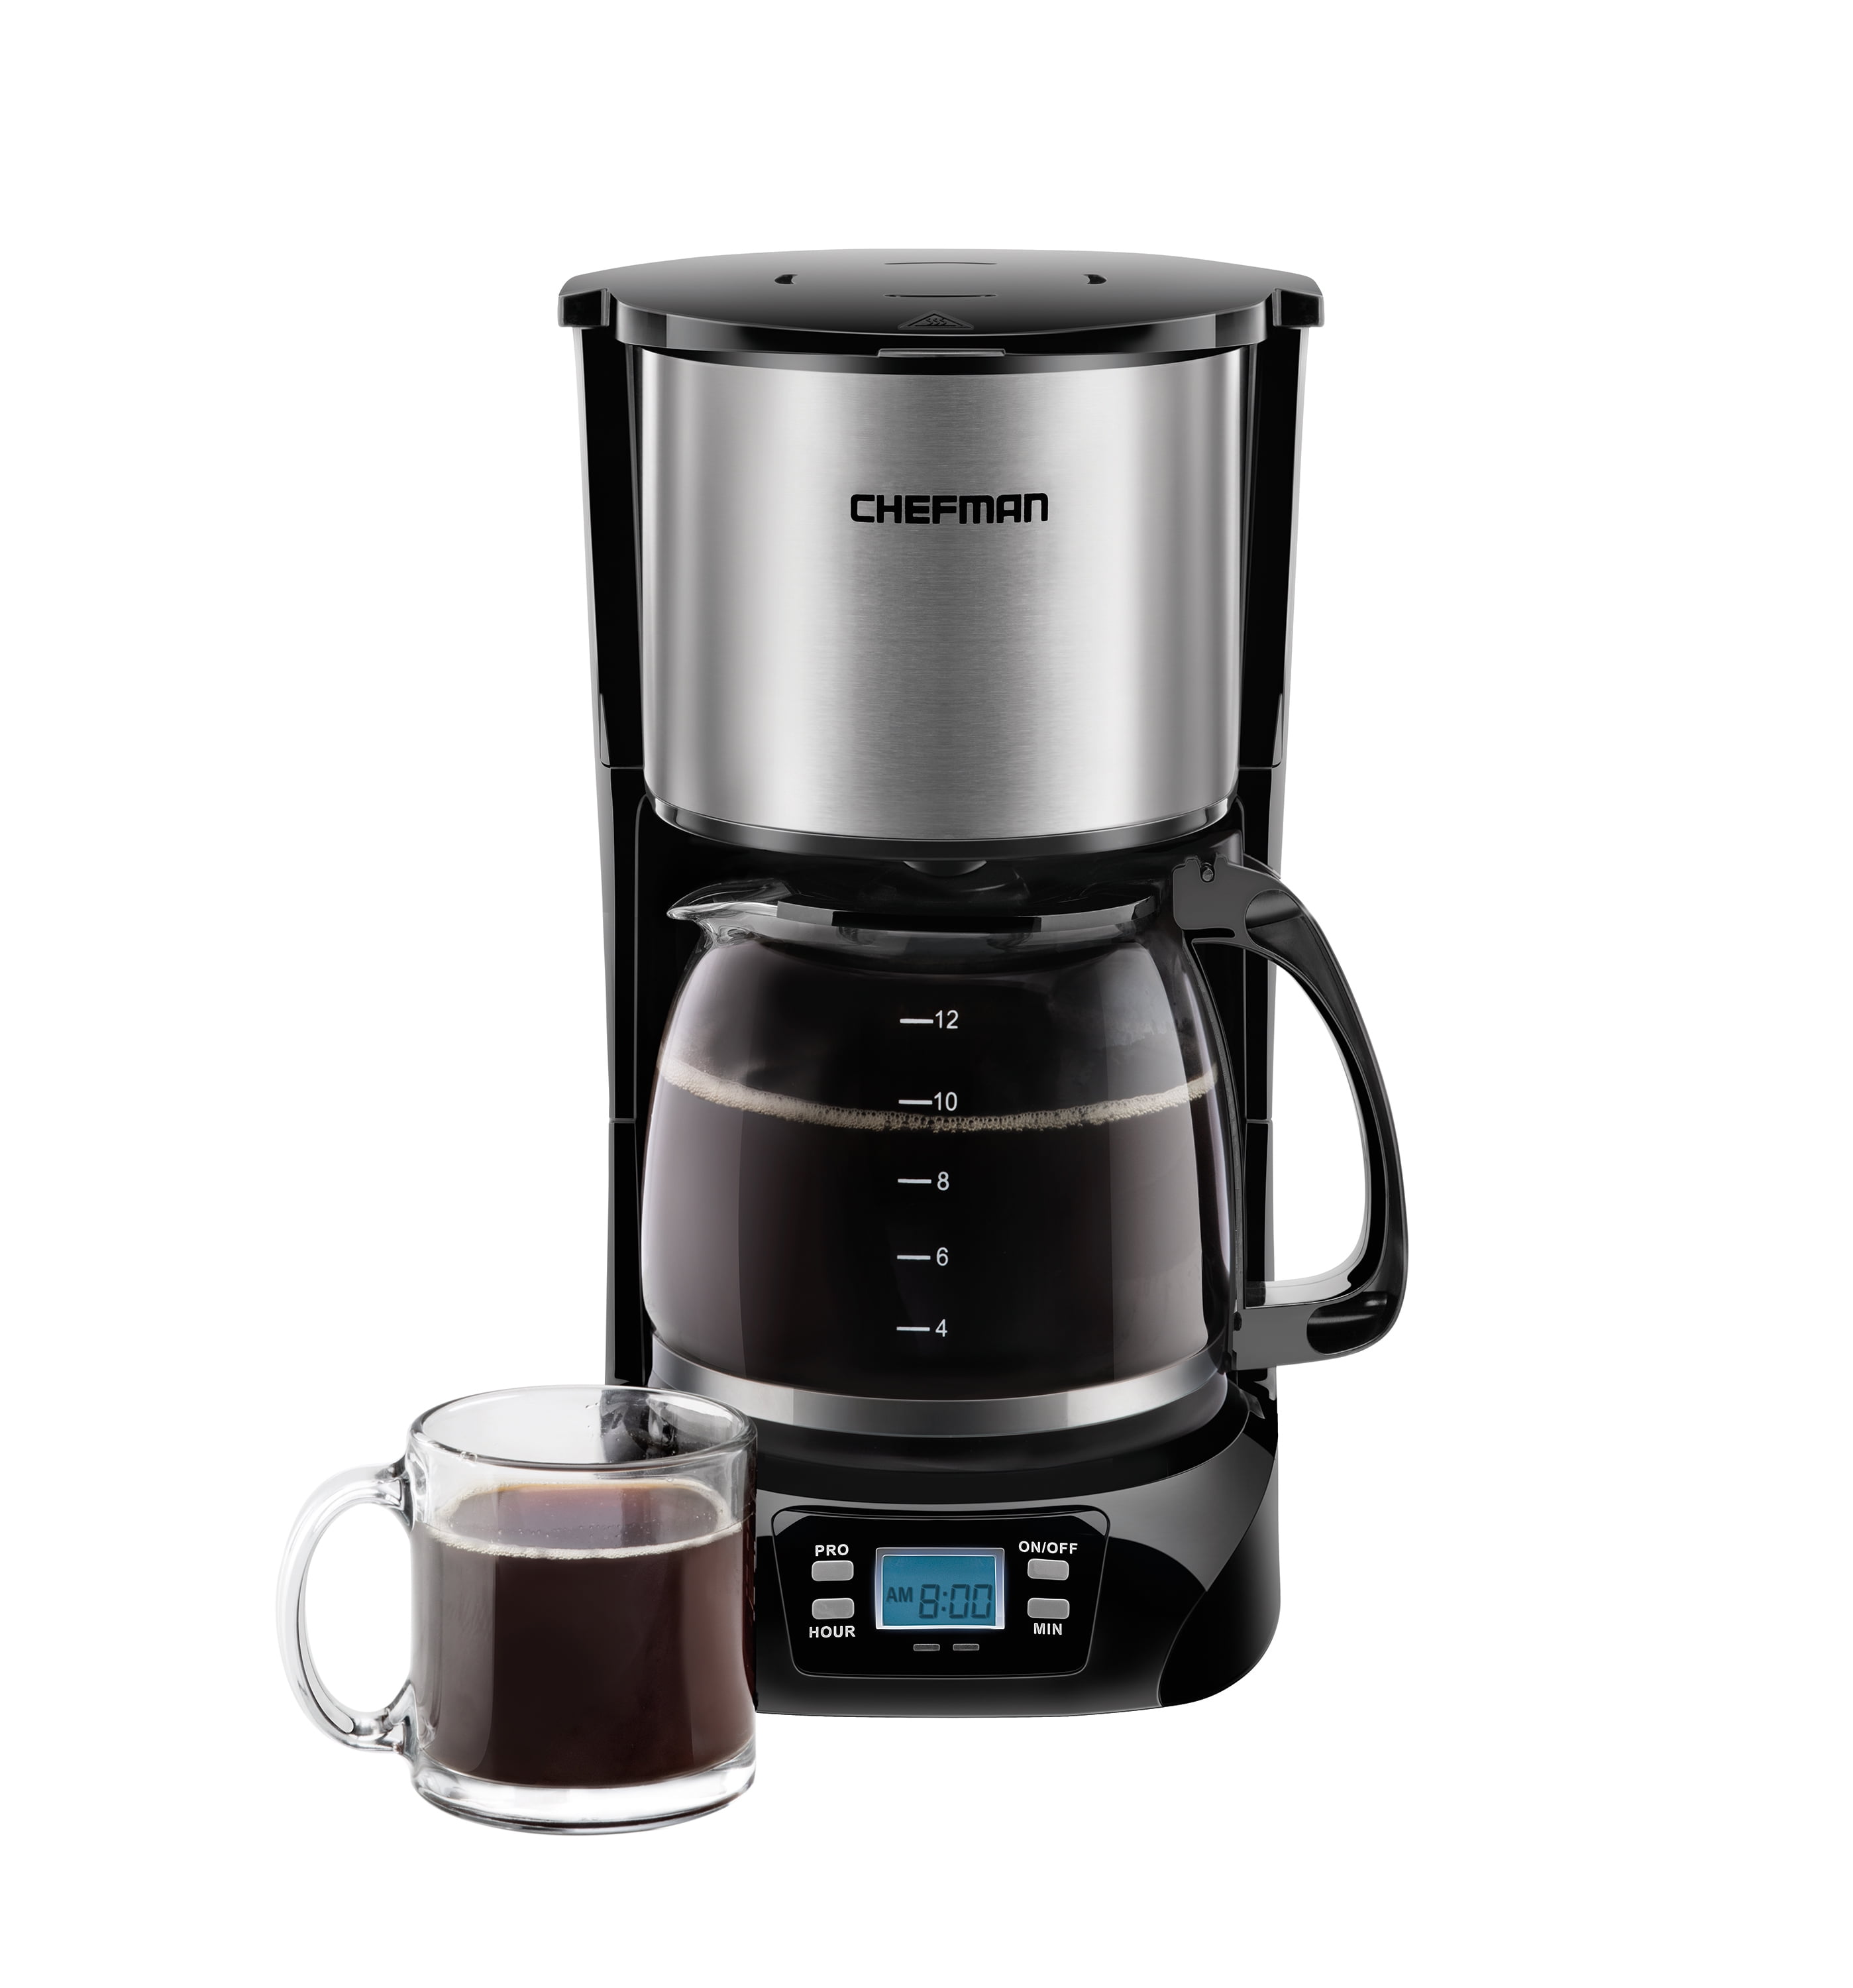 Chefman 12-Cup Programmable Coffee Maker, Round Stainless Steel Stainless Steel Coffee Maker Walmart